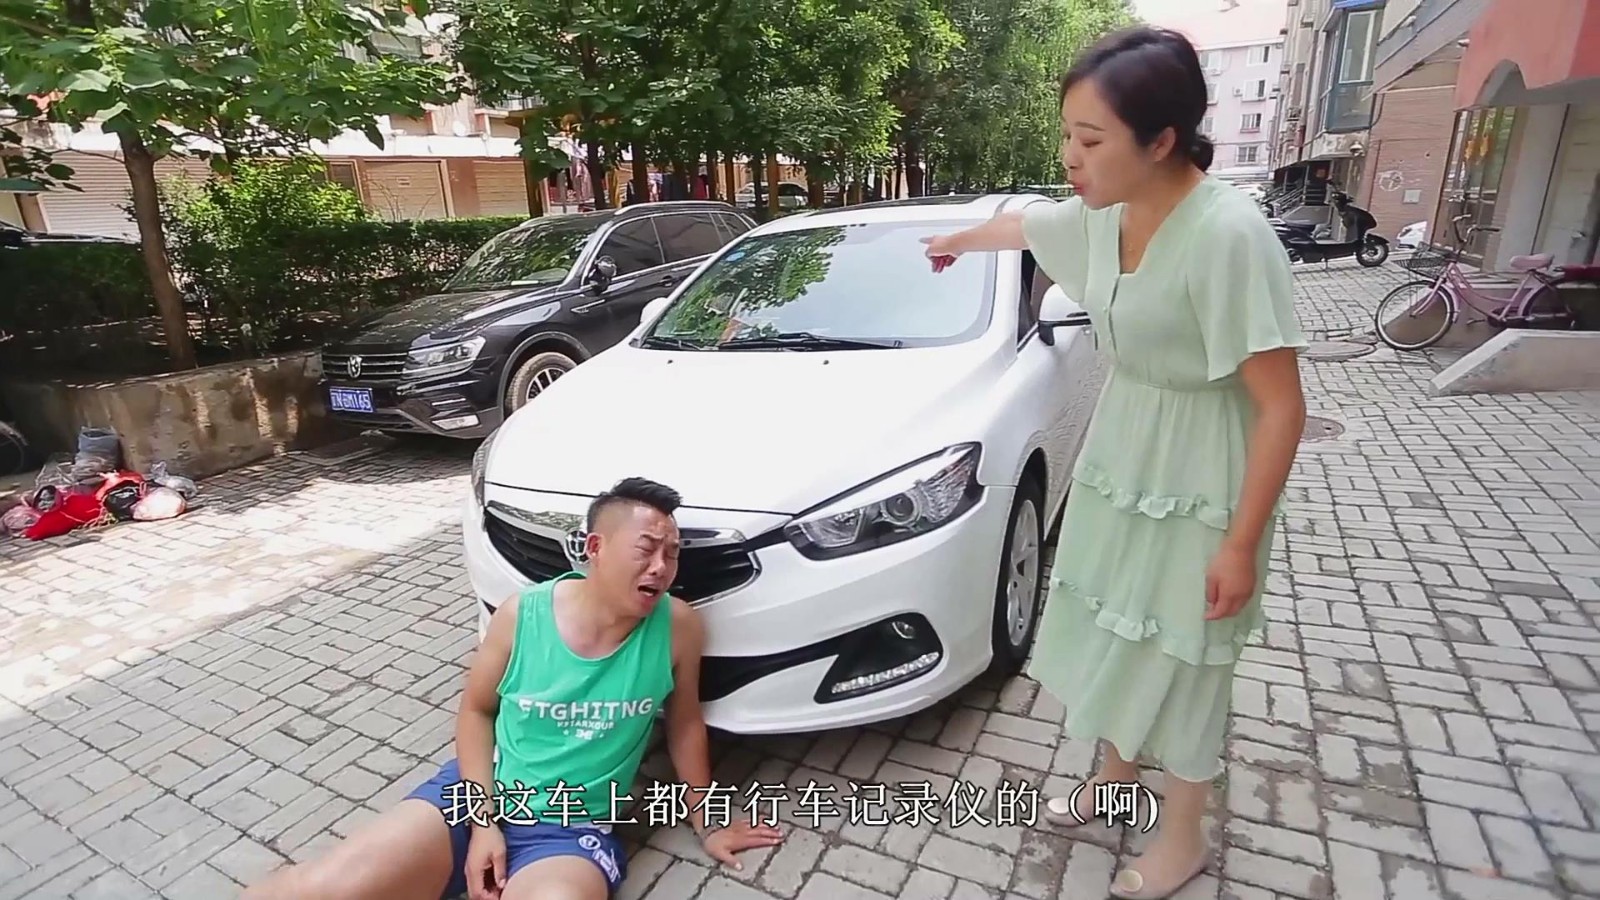 The second-class lad touched porcelain and blackmailed the beautiful car owner for 6,000 yuan. She gave 60,000 yuan directly. The result was funny.